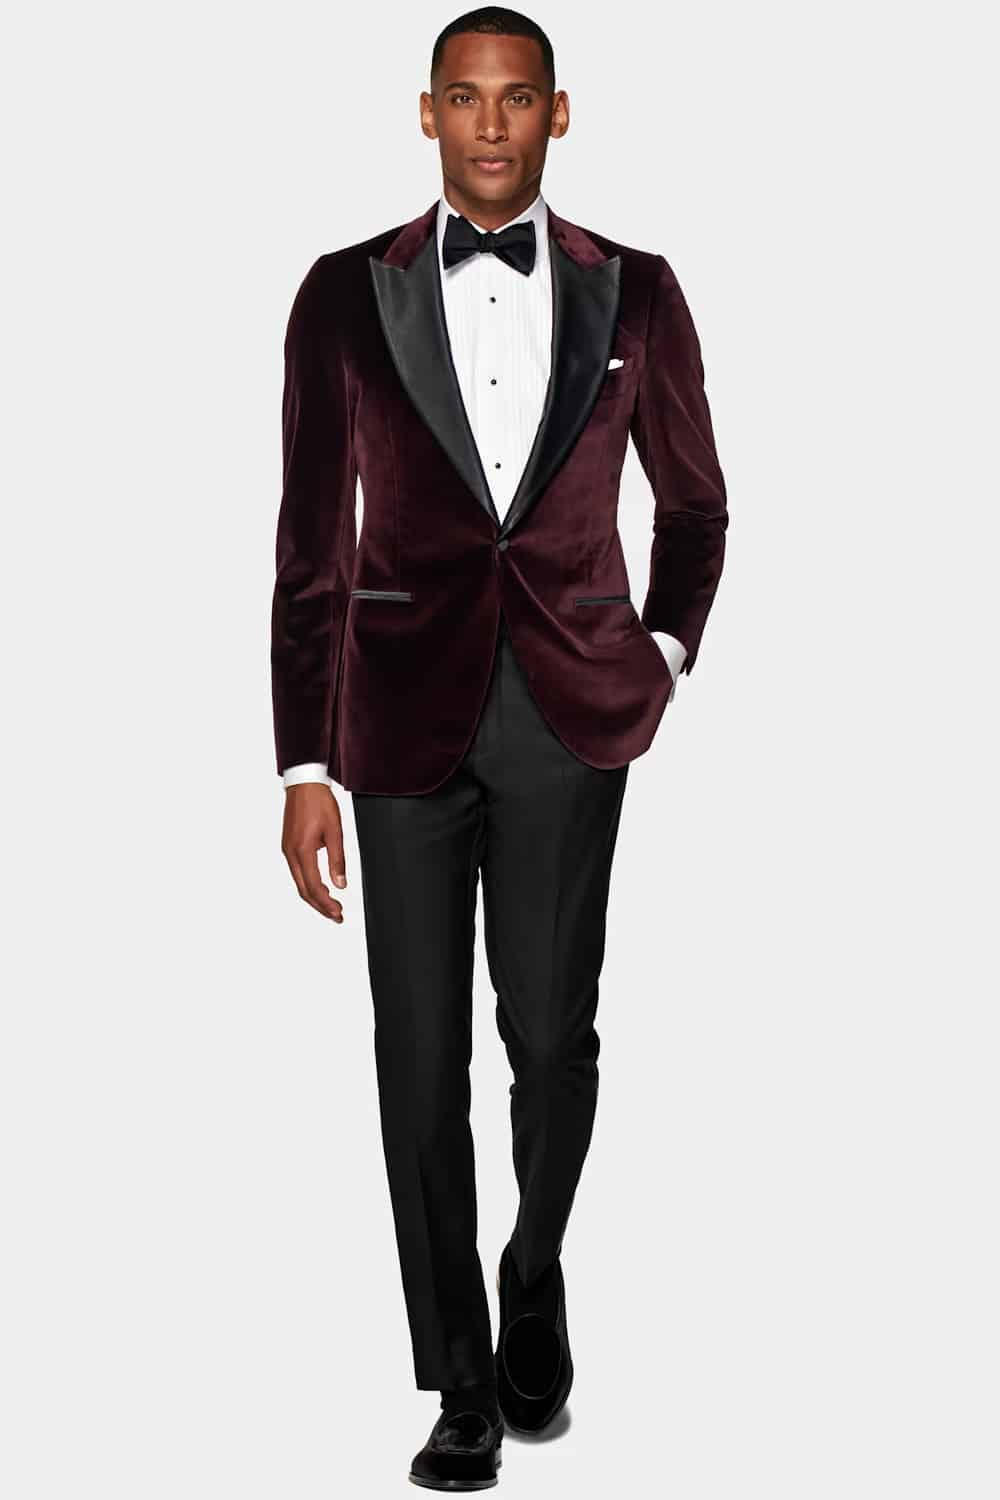 Men's Wedding Attire Guide: What To Wear (32 Outfits For 2023)